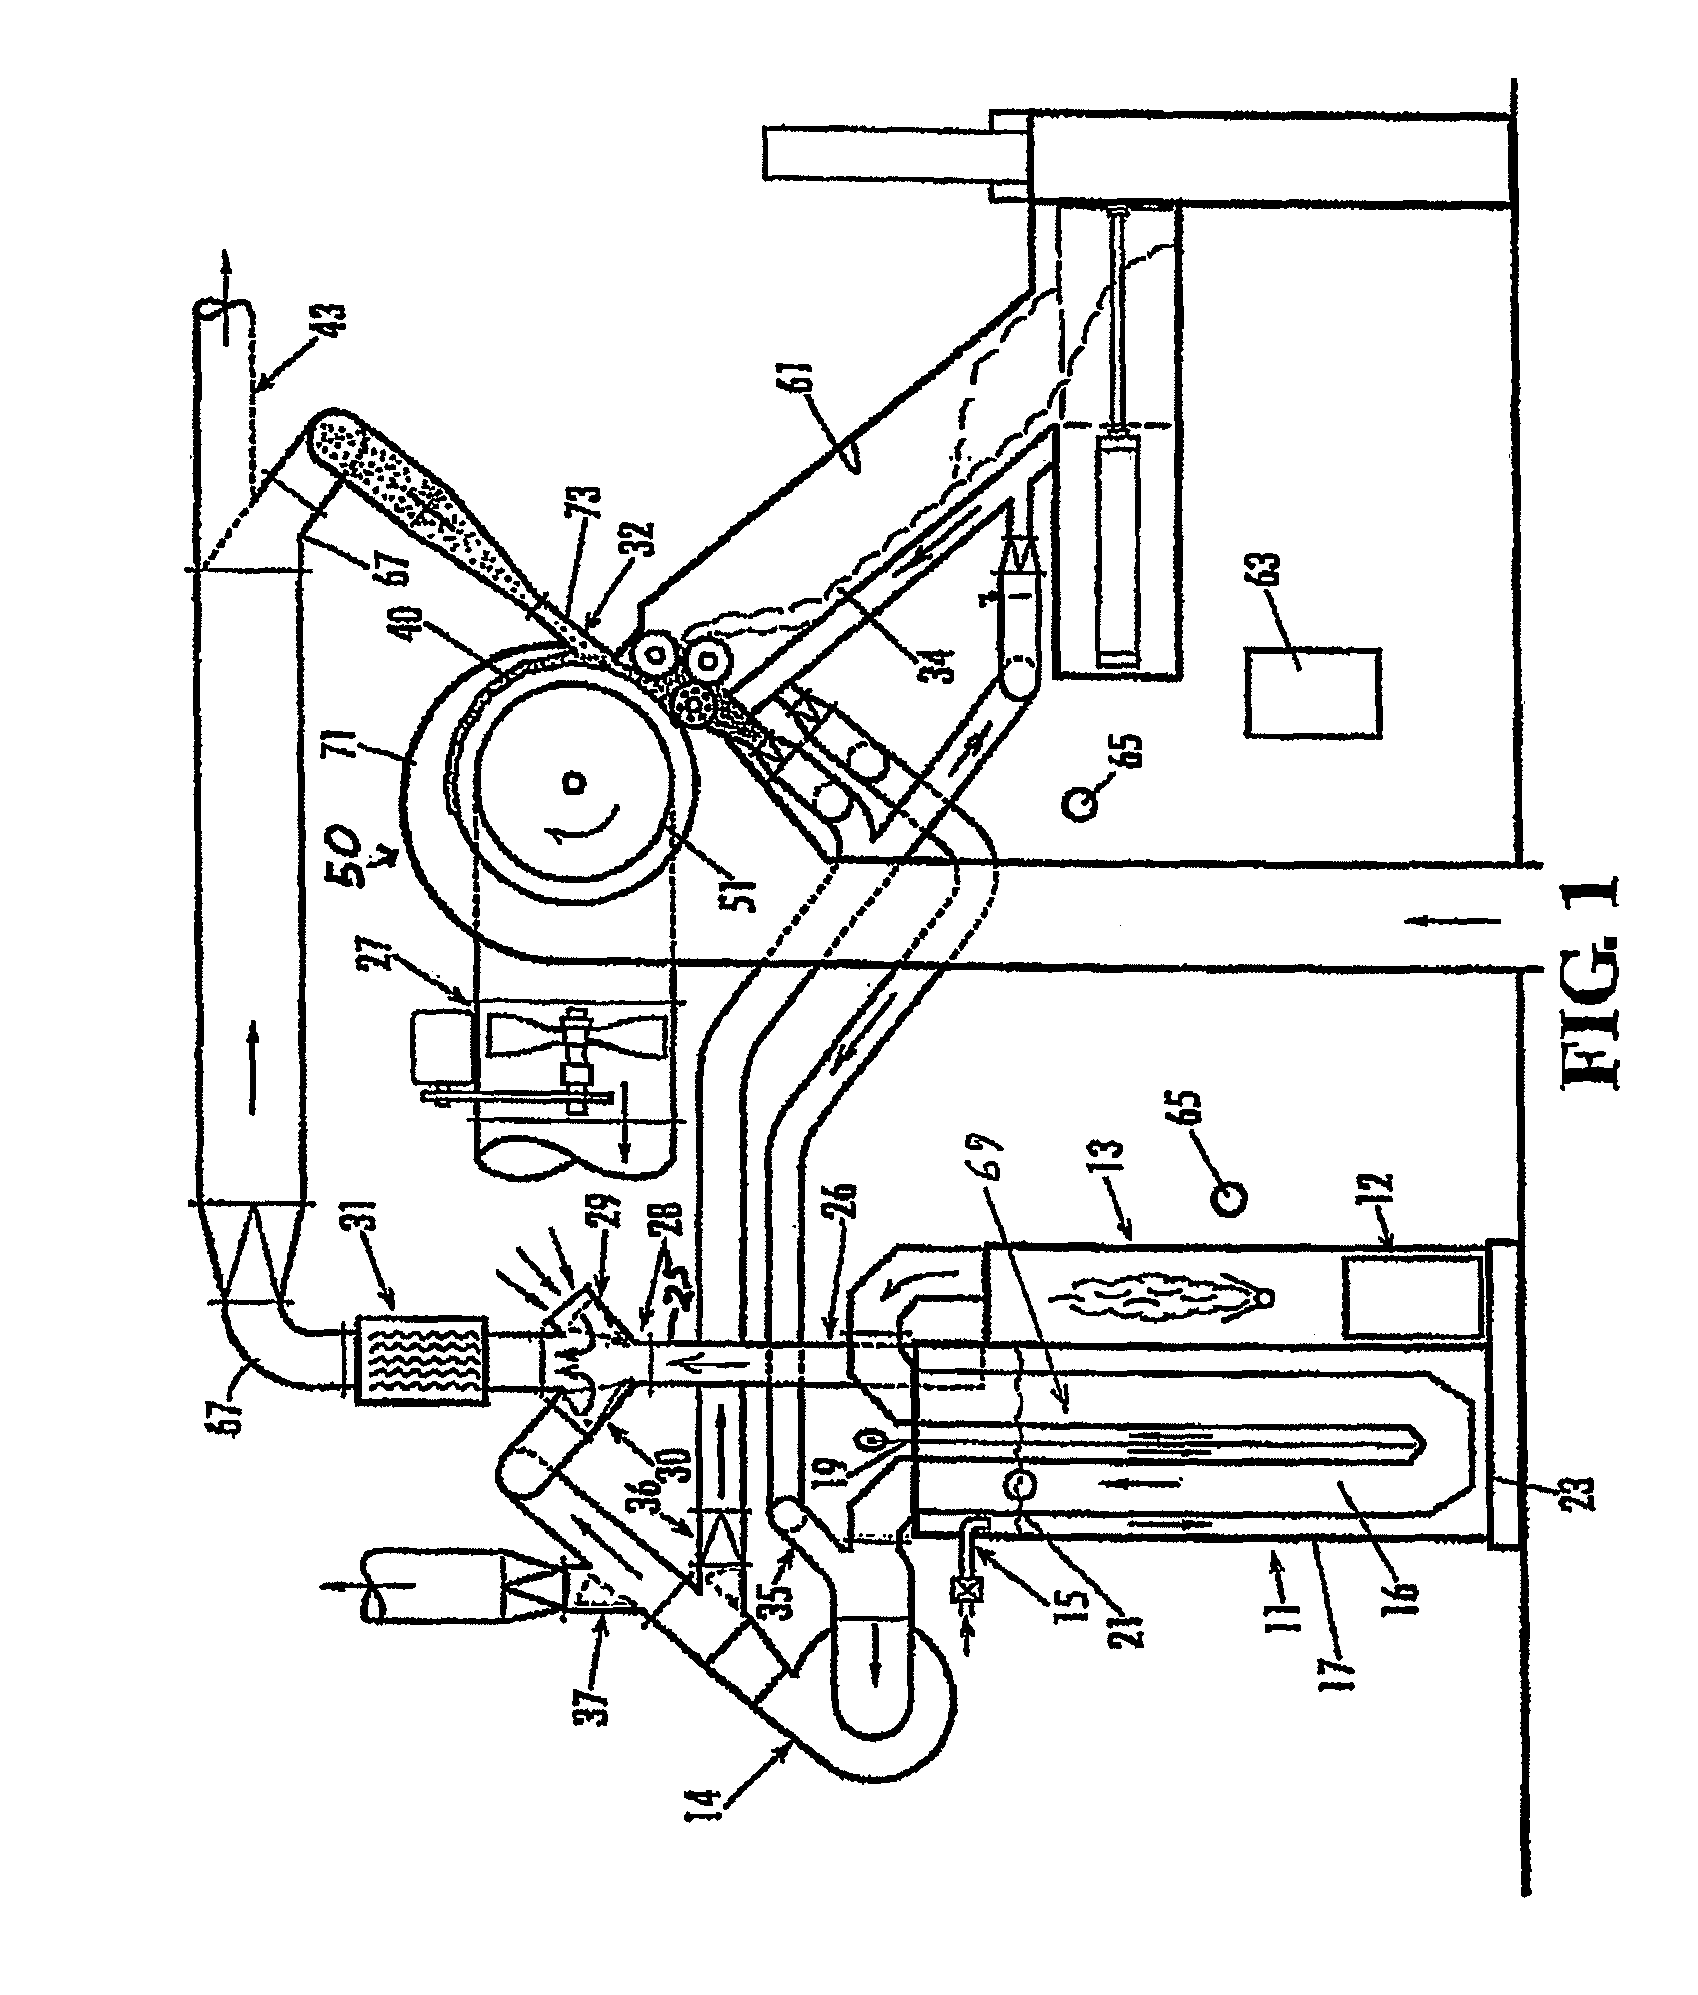 Method, apparatus and system for adding moisture to cotton fibers during the cotton ginning process